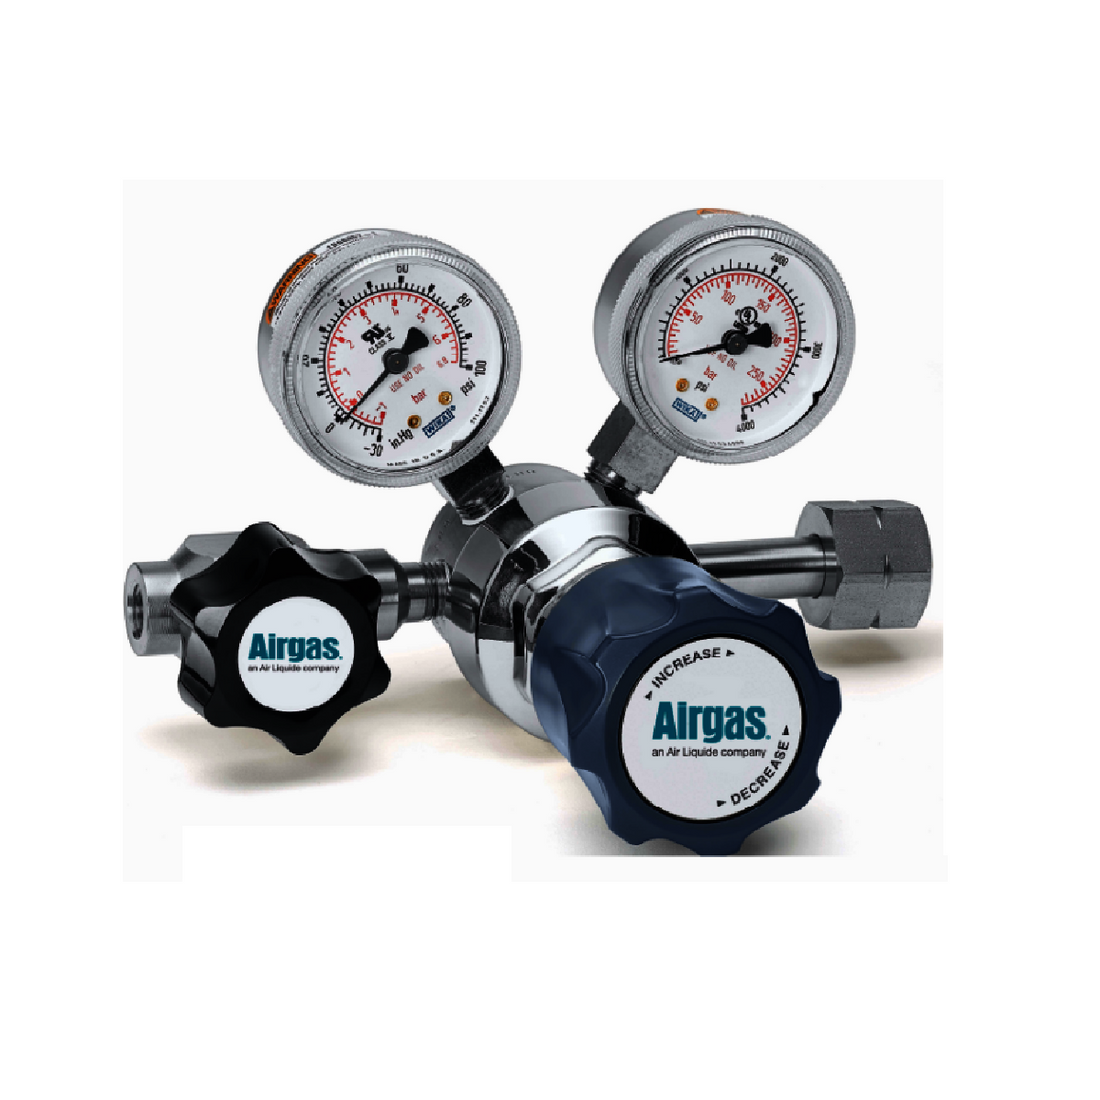 Airgas Model 223B350 Stainless Steel Corrosive Gas Single Stage Regulator With CGA-350 Connection